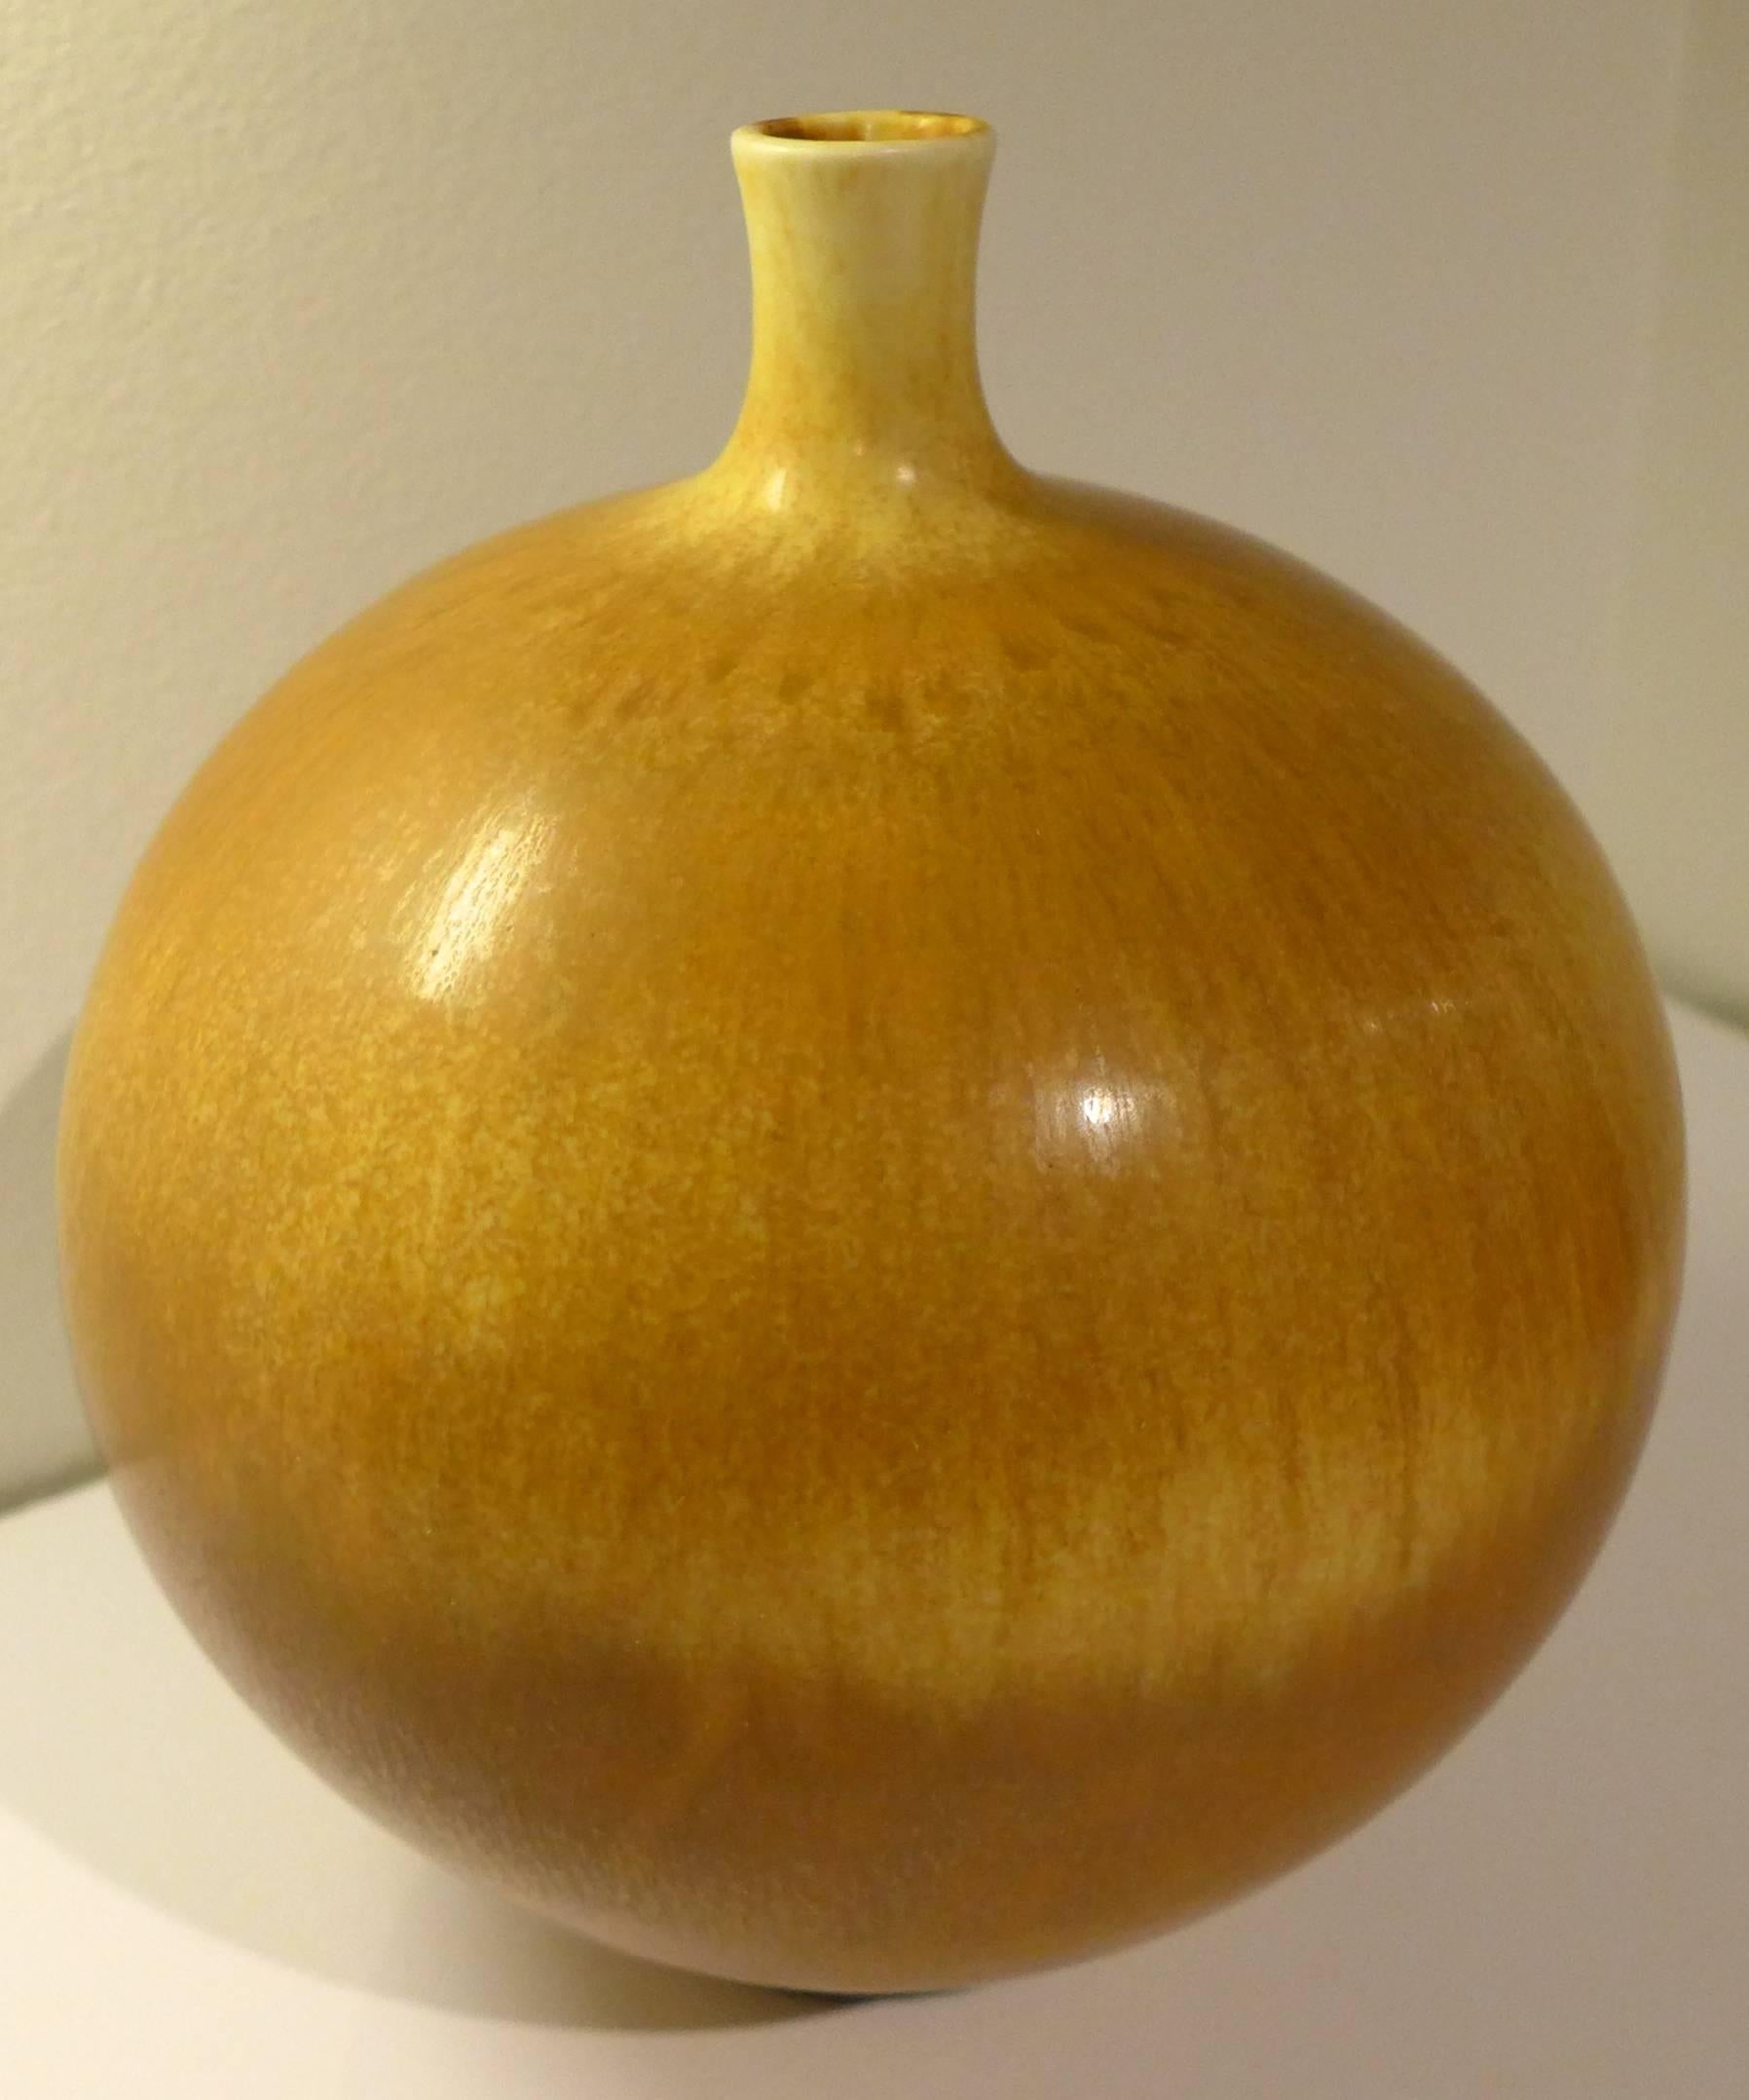 Hand-thrown studio vase with spherical footed body and tapering neck. With a brown/yellow multi-chromatic matte hares fur glaze. By eminent Swedish ceramist Berndt Friberg, made at Gustavsberg in 1971. In excellent condition, with full incised marks.